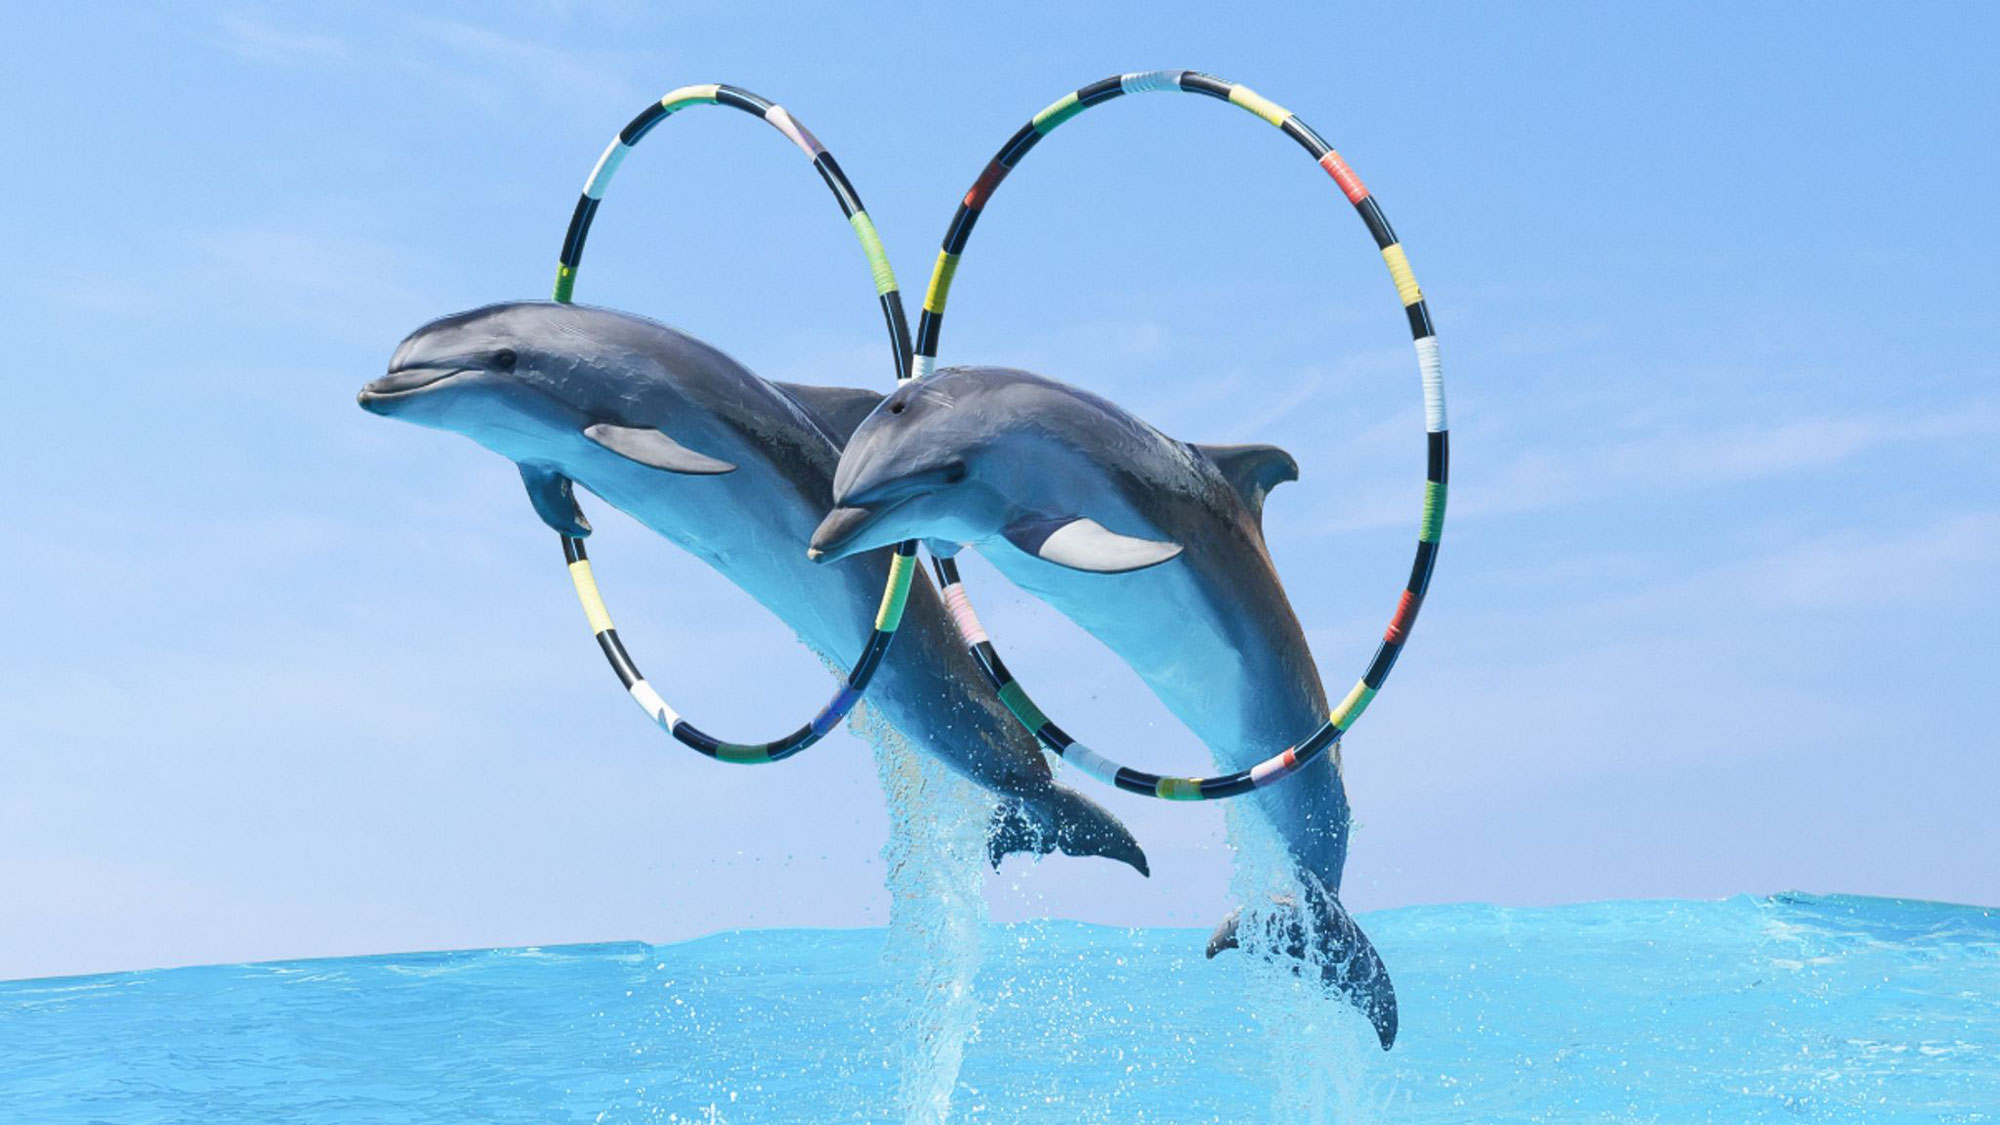 Expedia stops selling holidays that include experiences with captive dolphins and whales